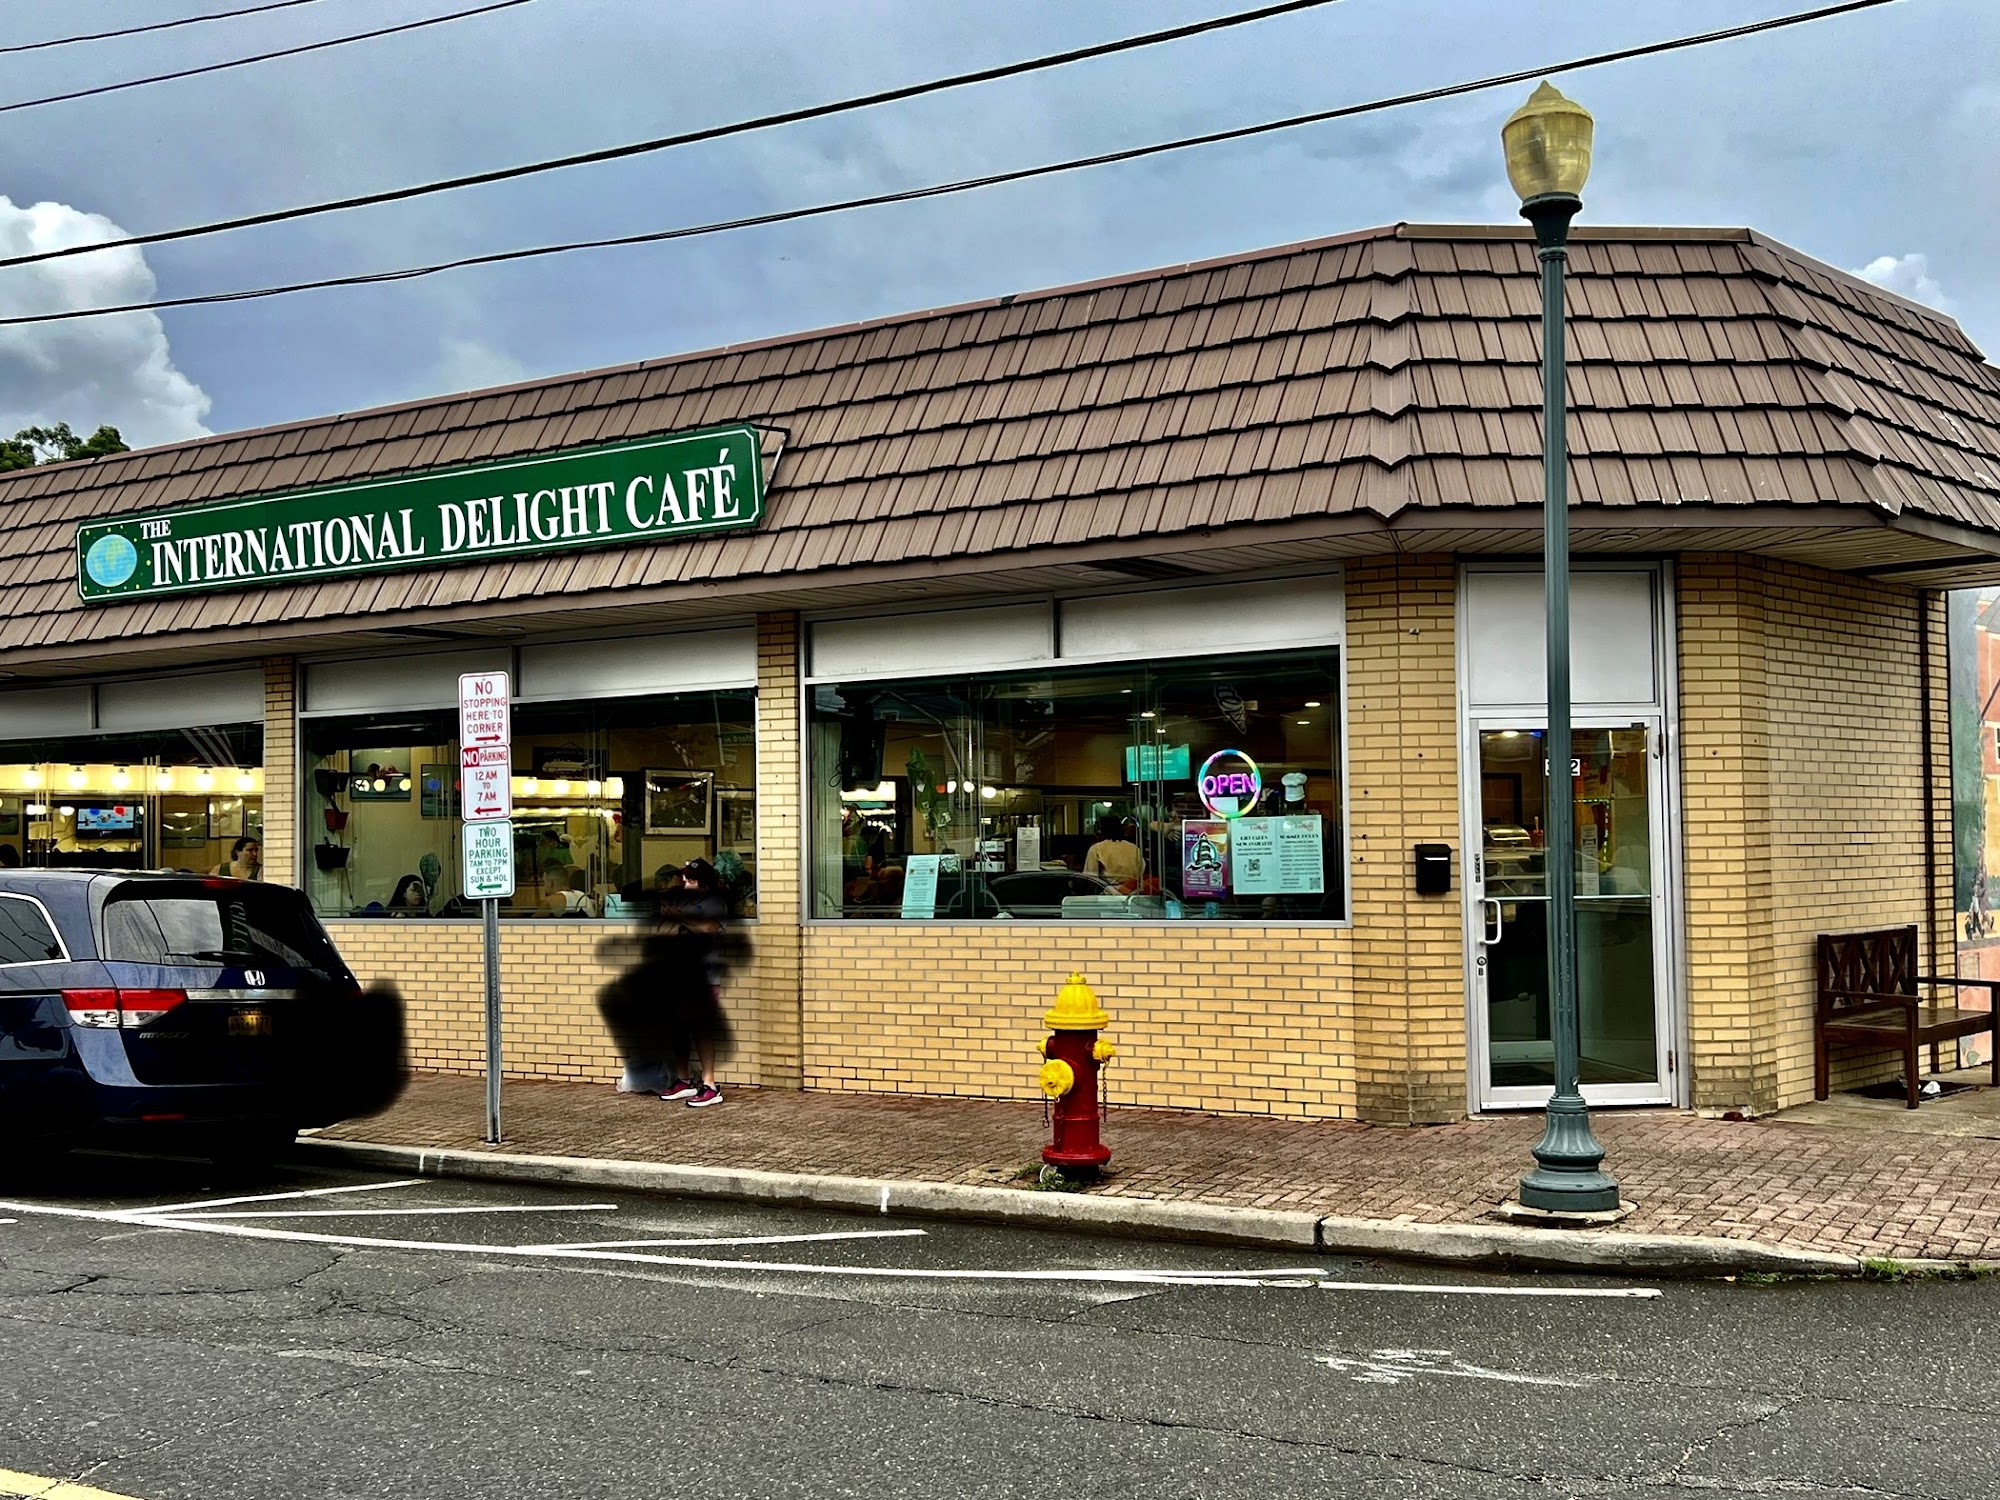 The International Delight Cafe